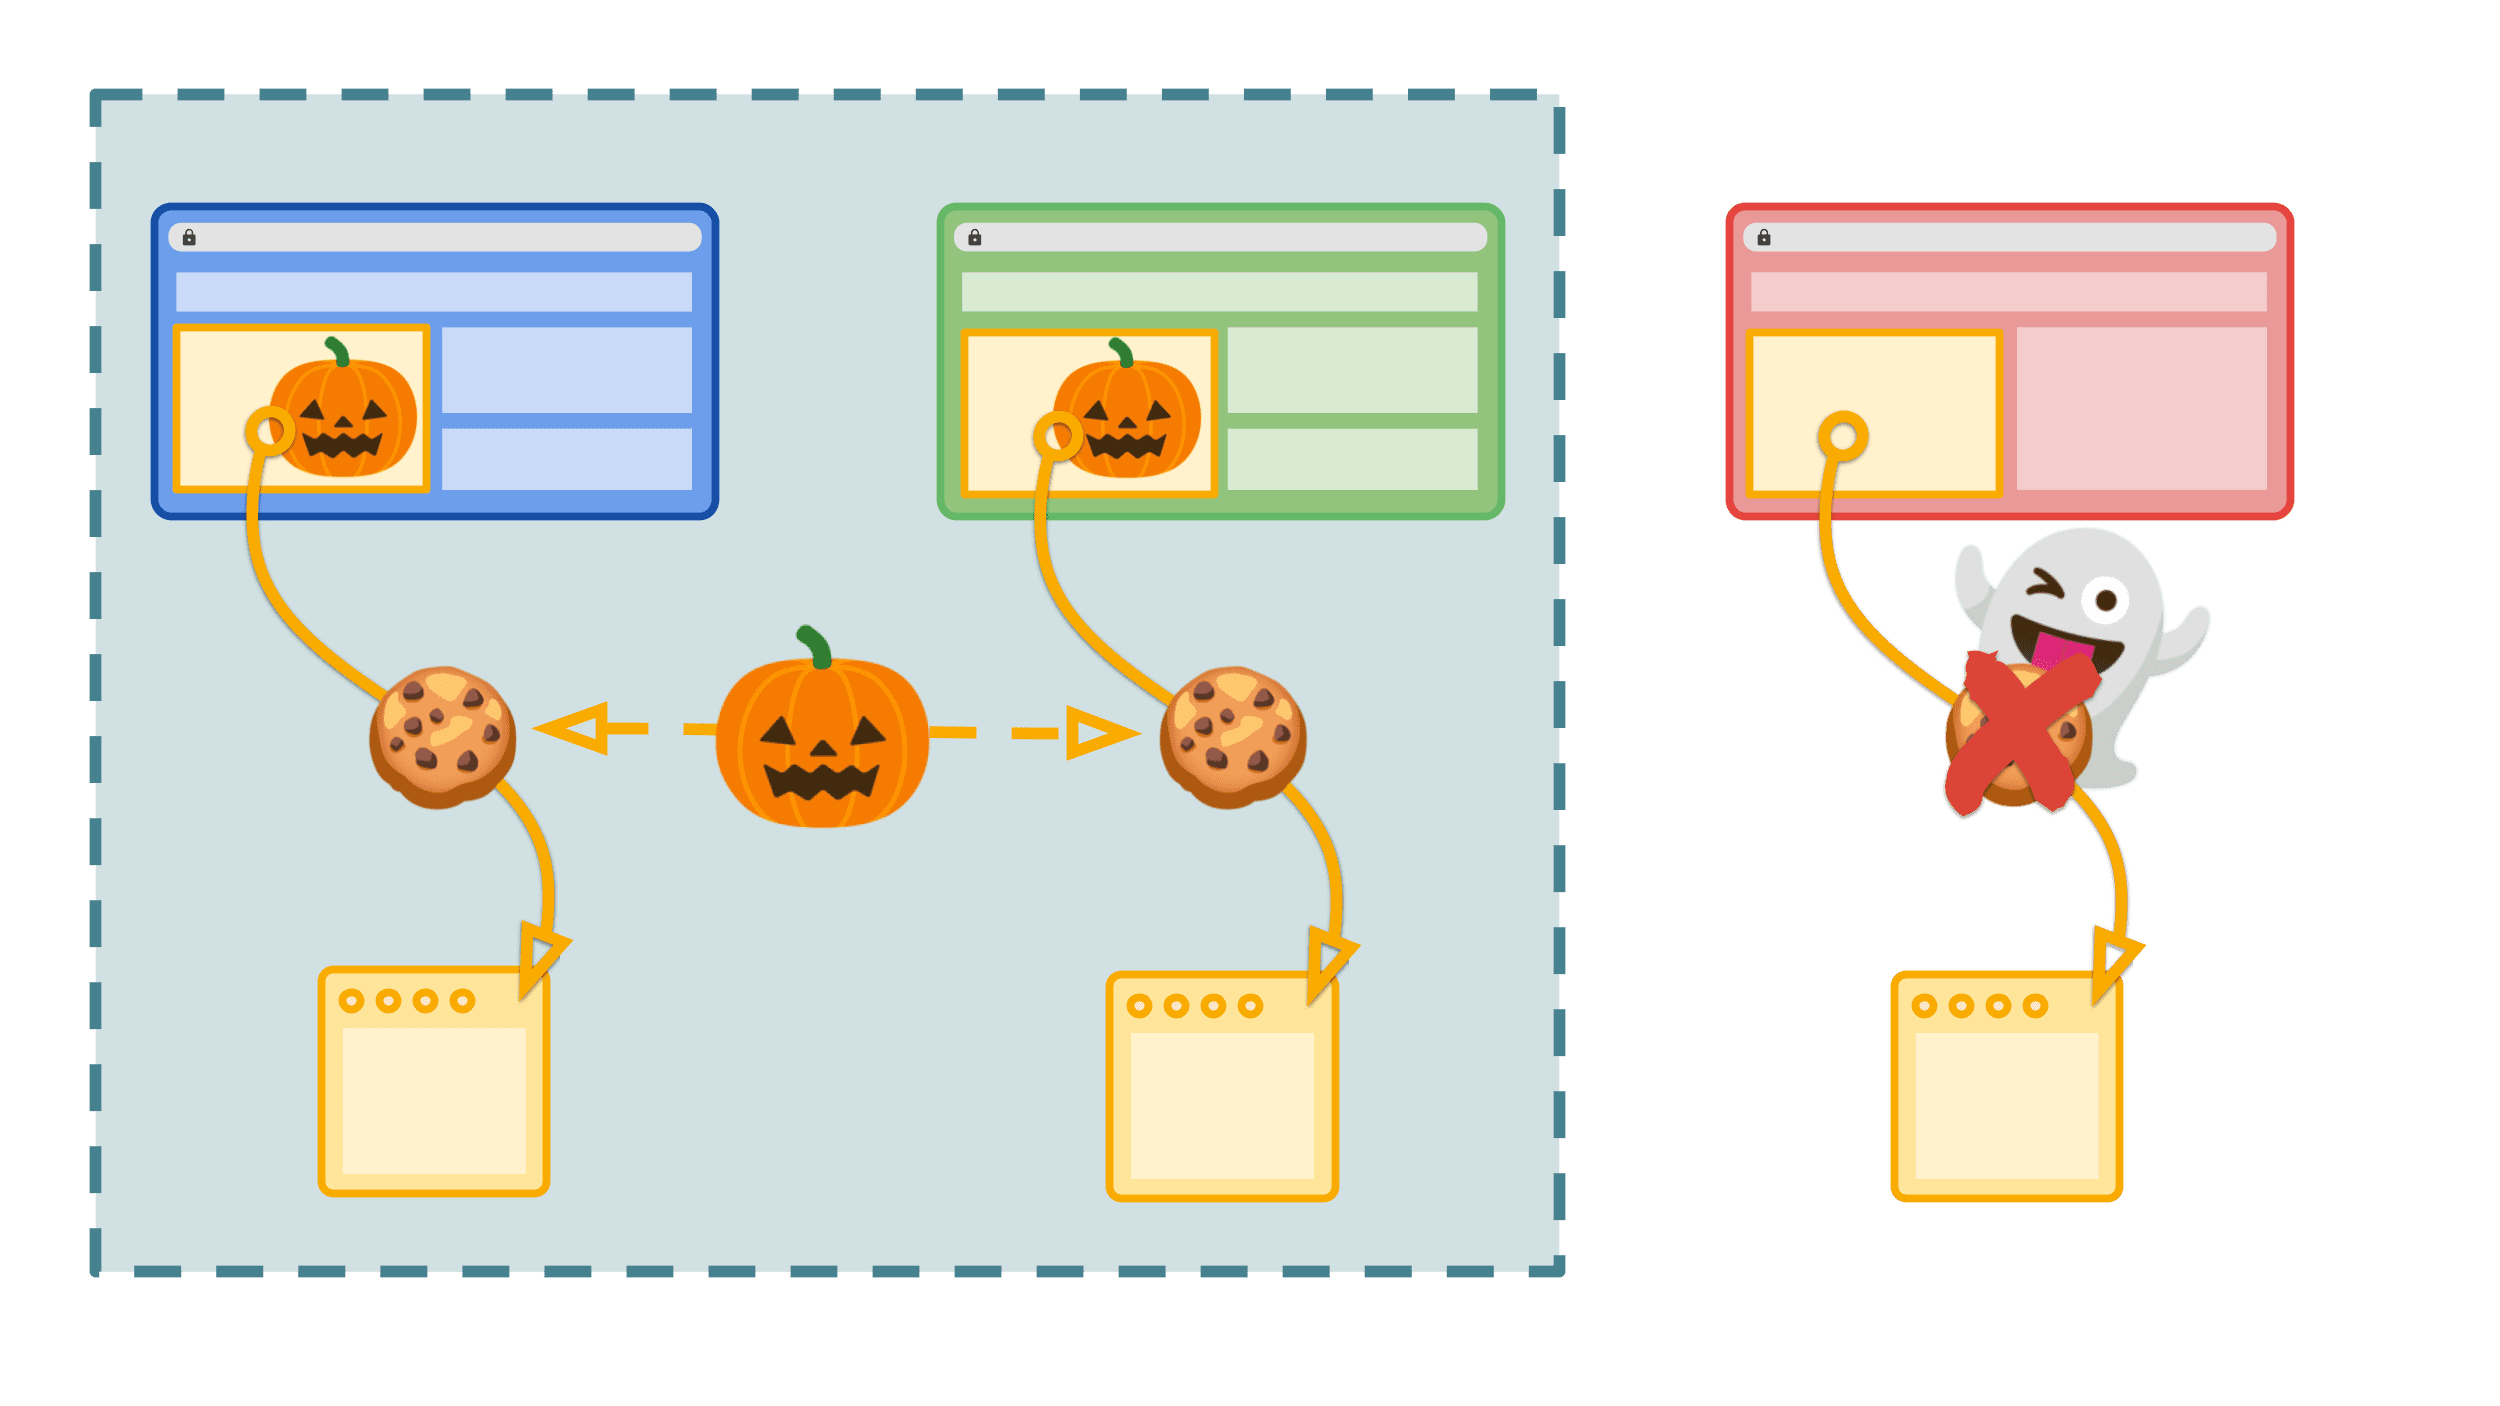 First-Party Sets allows a shared cookie jar only between related sites